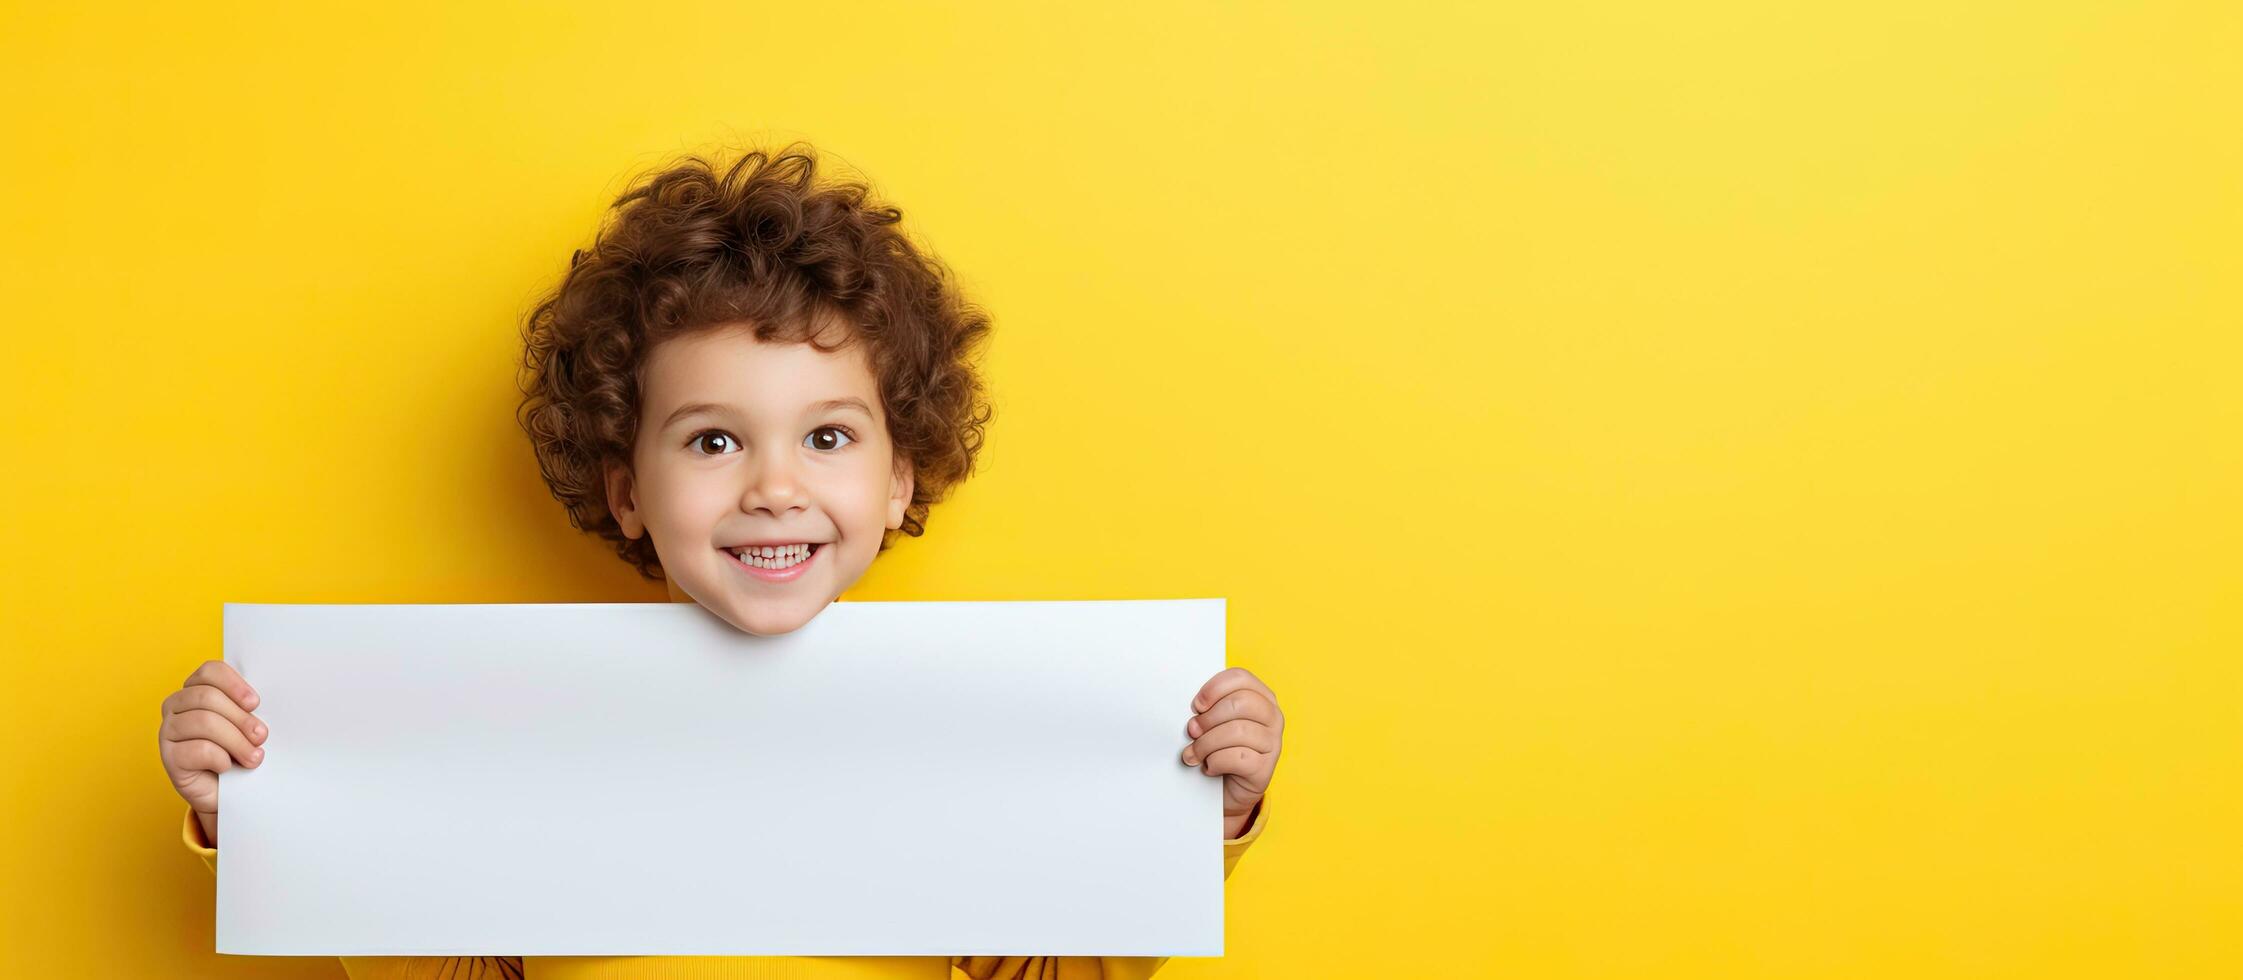 Empty yellow board for text isolated over yellow background with happy children copy space photo